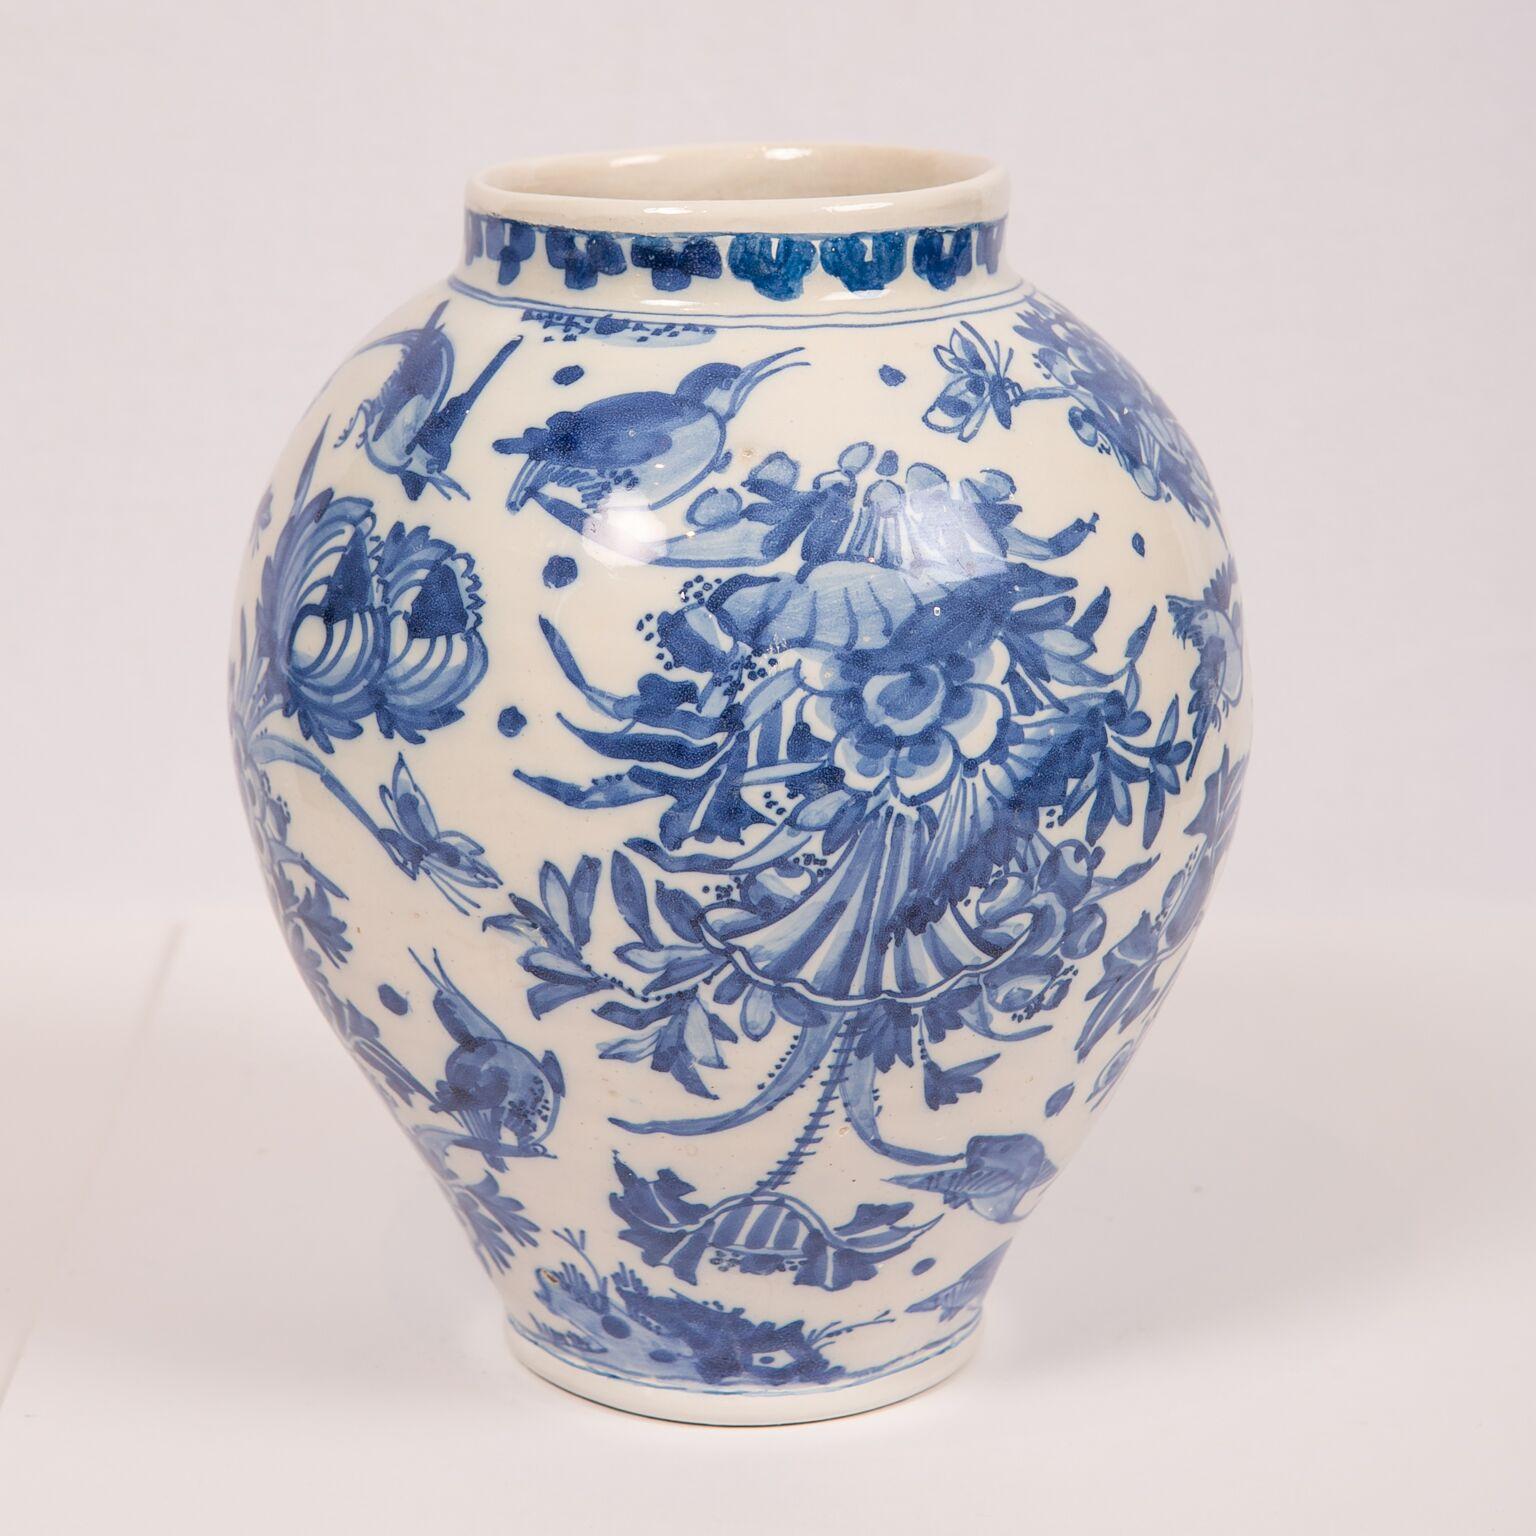 Hand-Painted London Delftware Blue and White Flower Vase 17th Century circa 1685